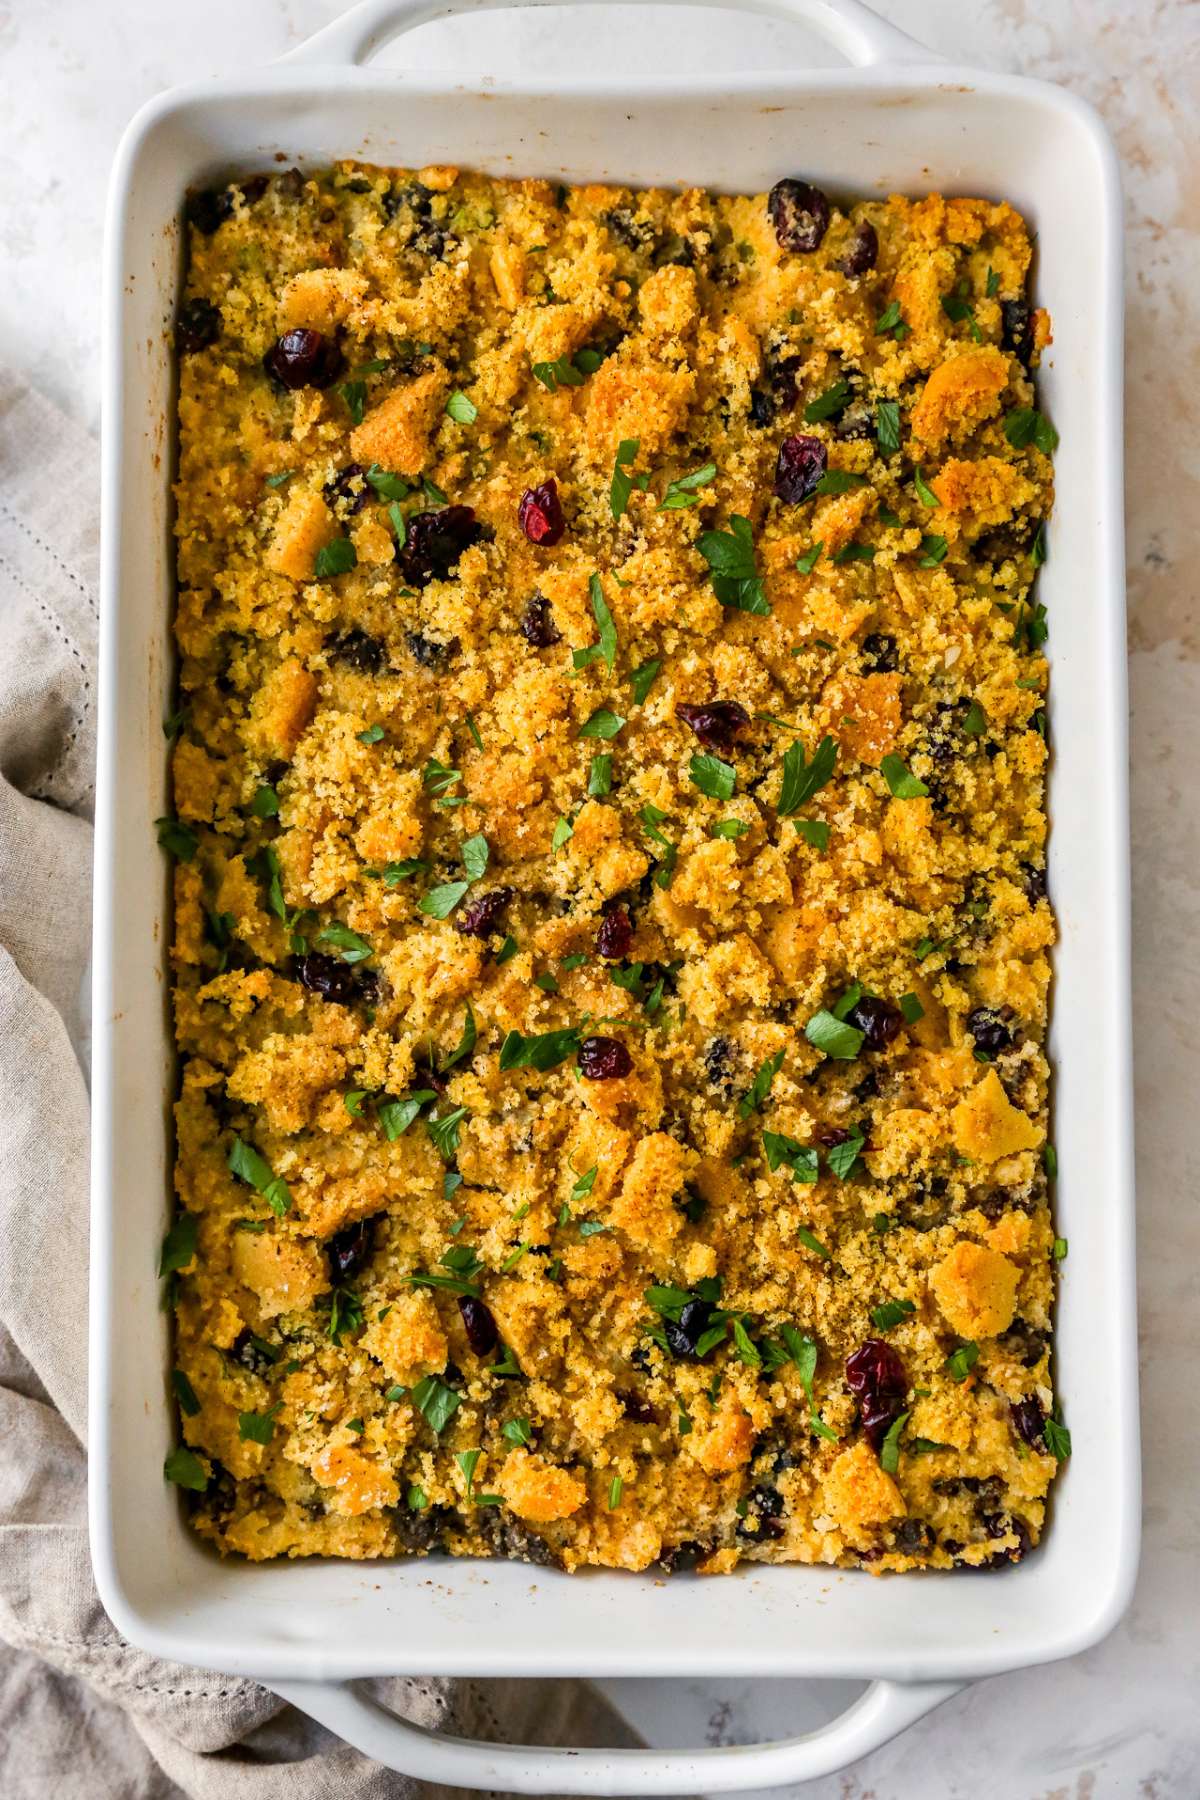 Baked cornbread stuffing in large white casserole dish.